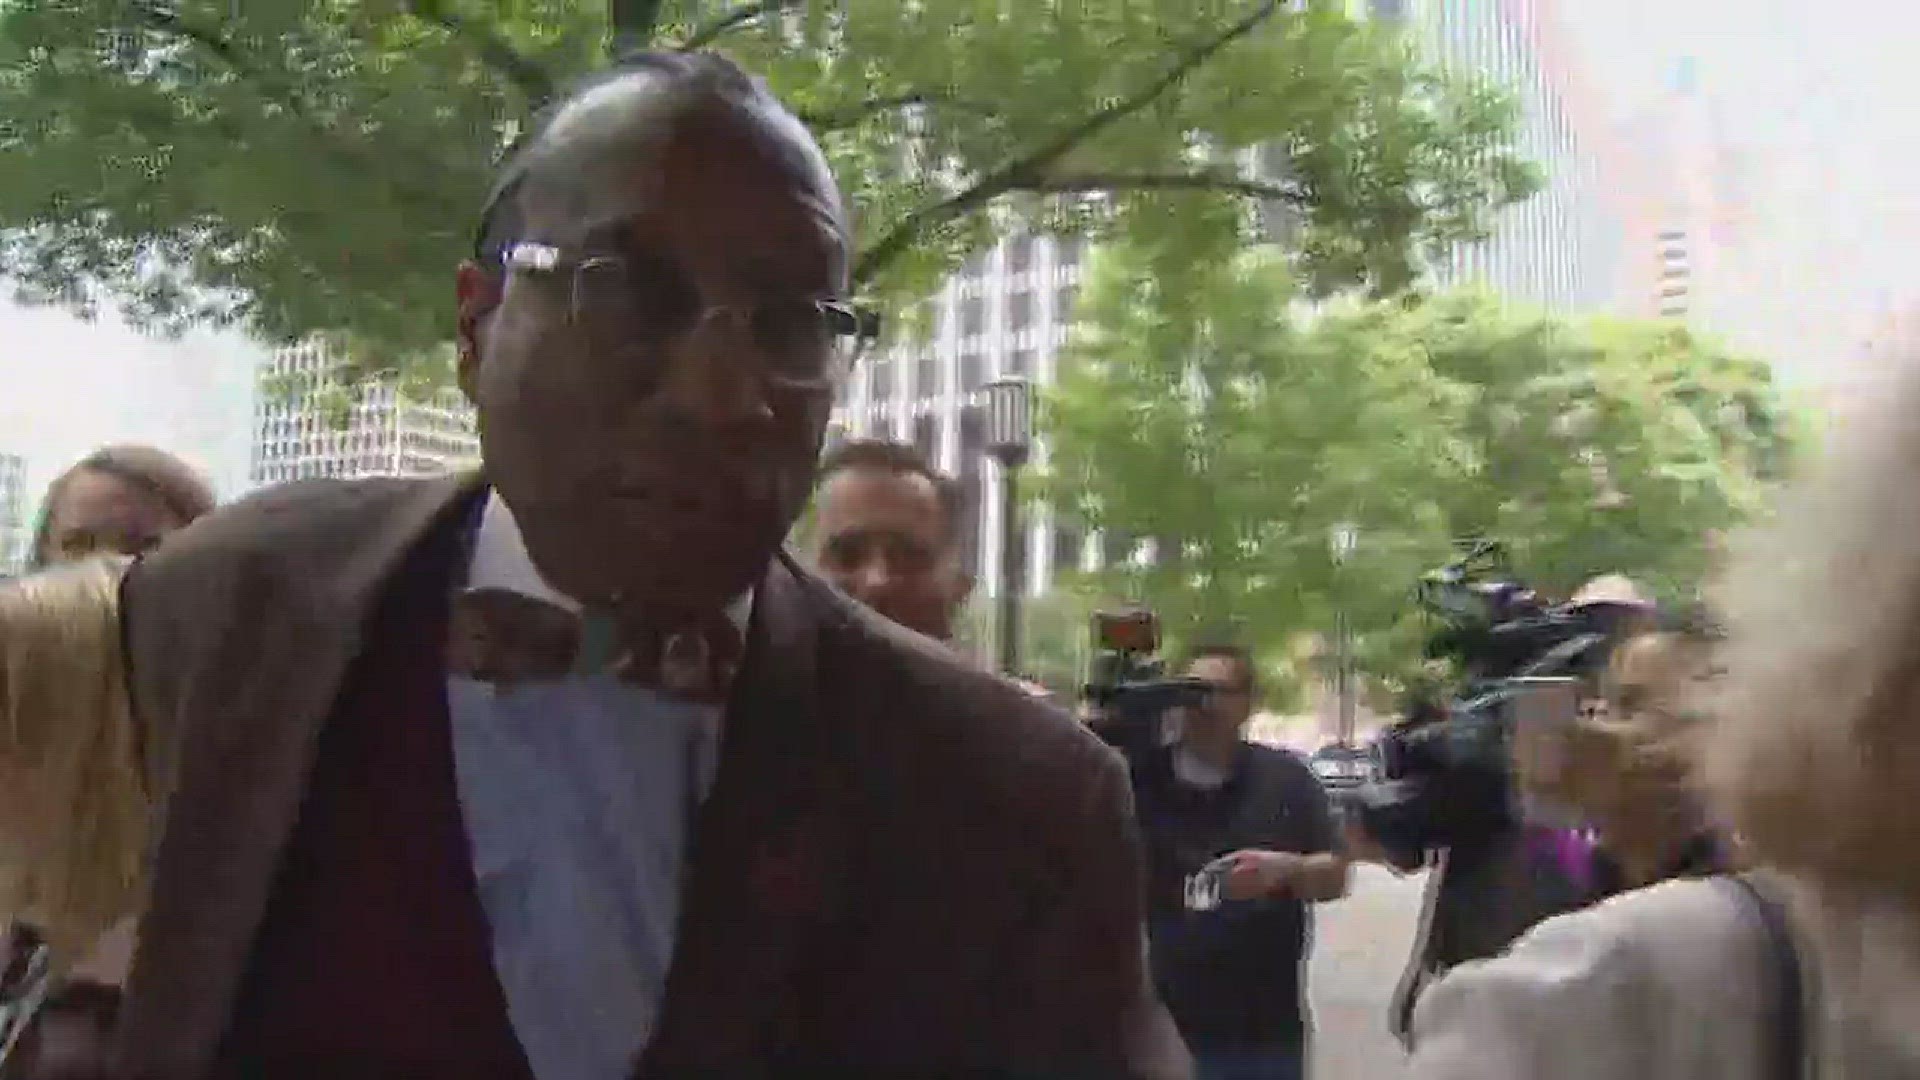 John Wiley Price and his top assistant, Dapheny Fain, were found not guilty Friday of the major charges against them. Brett Shipp has reaction.